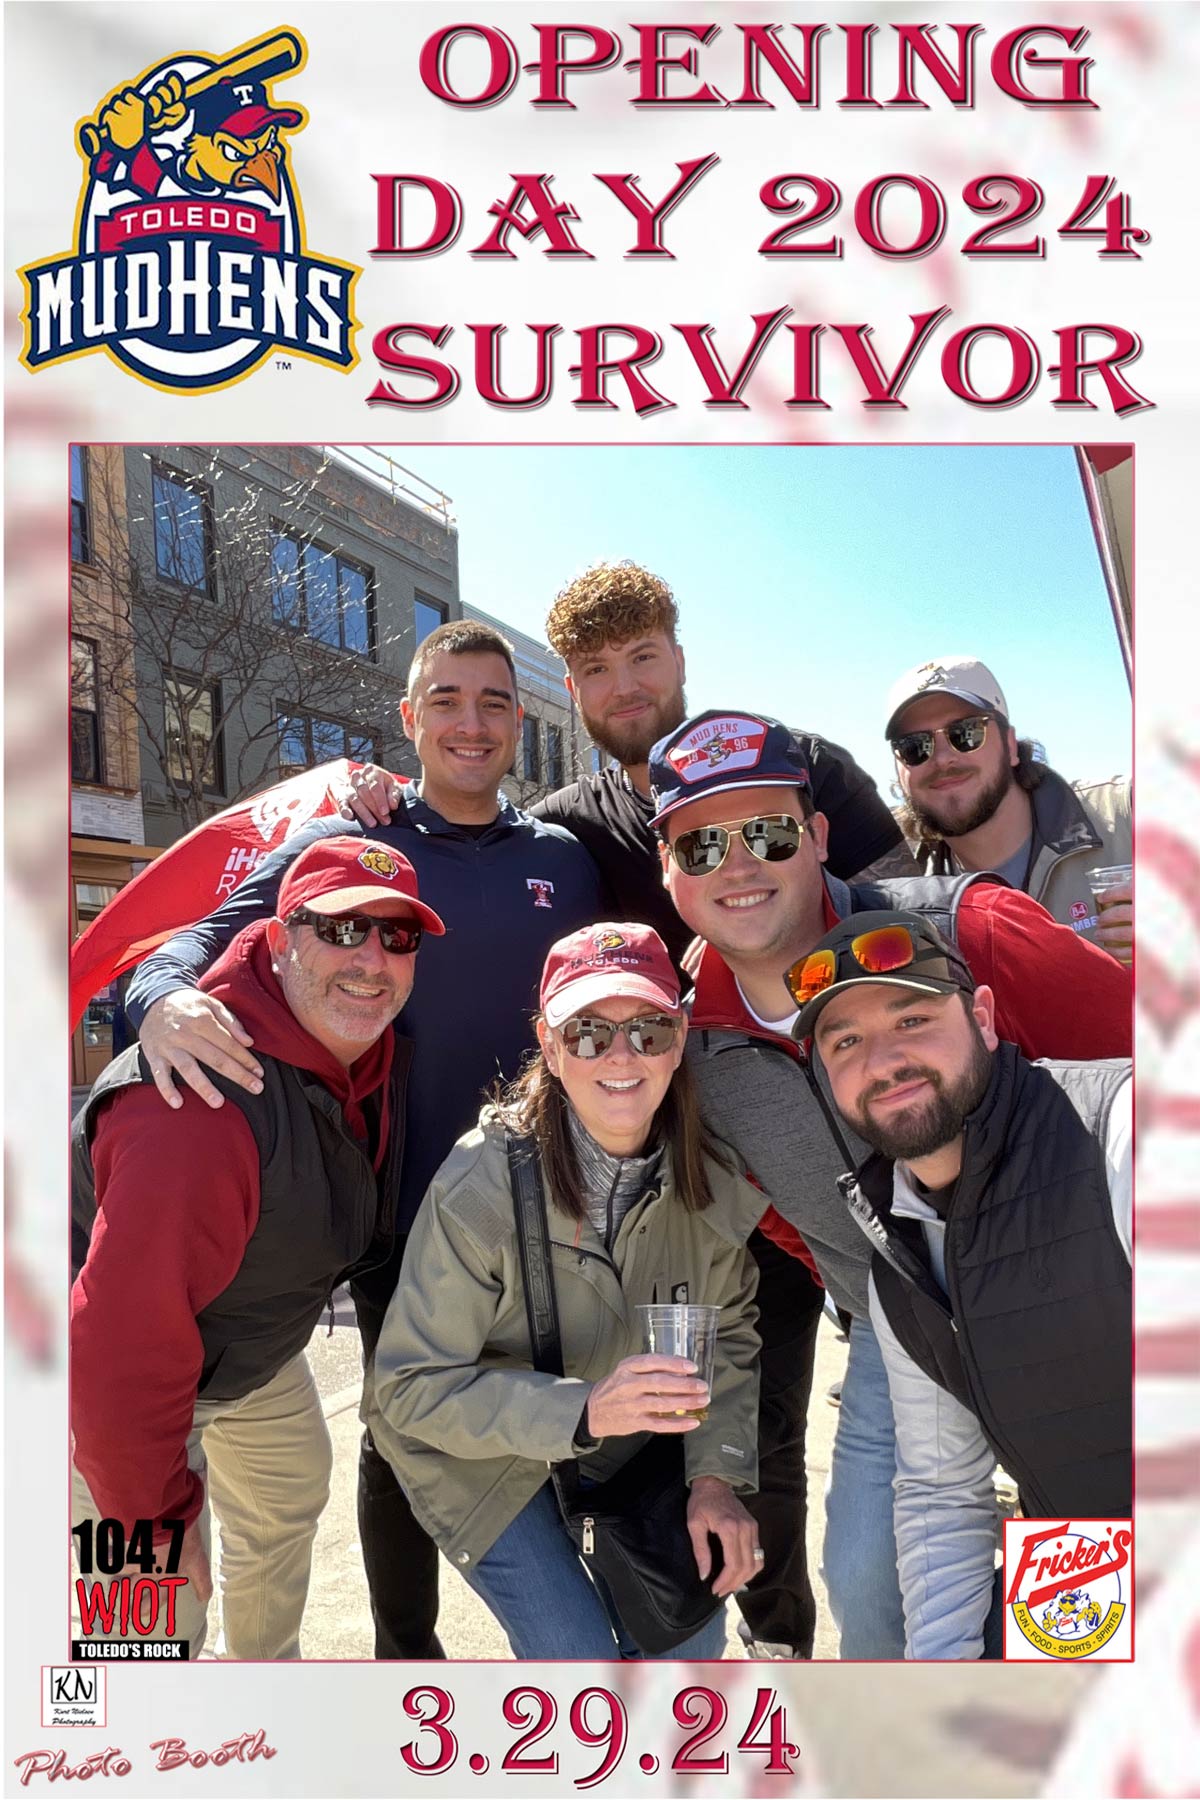 Mud Hens Opening Day official photo booth experience by Kurt Nielsen Photography